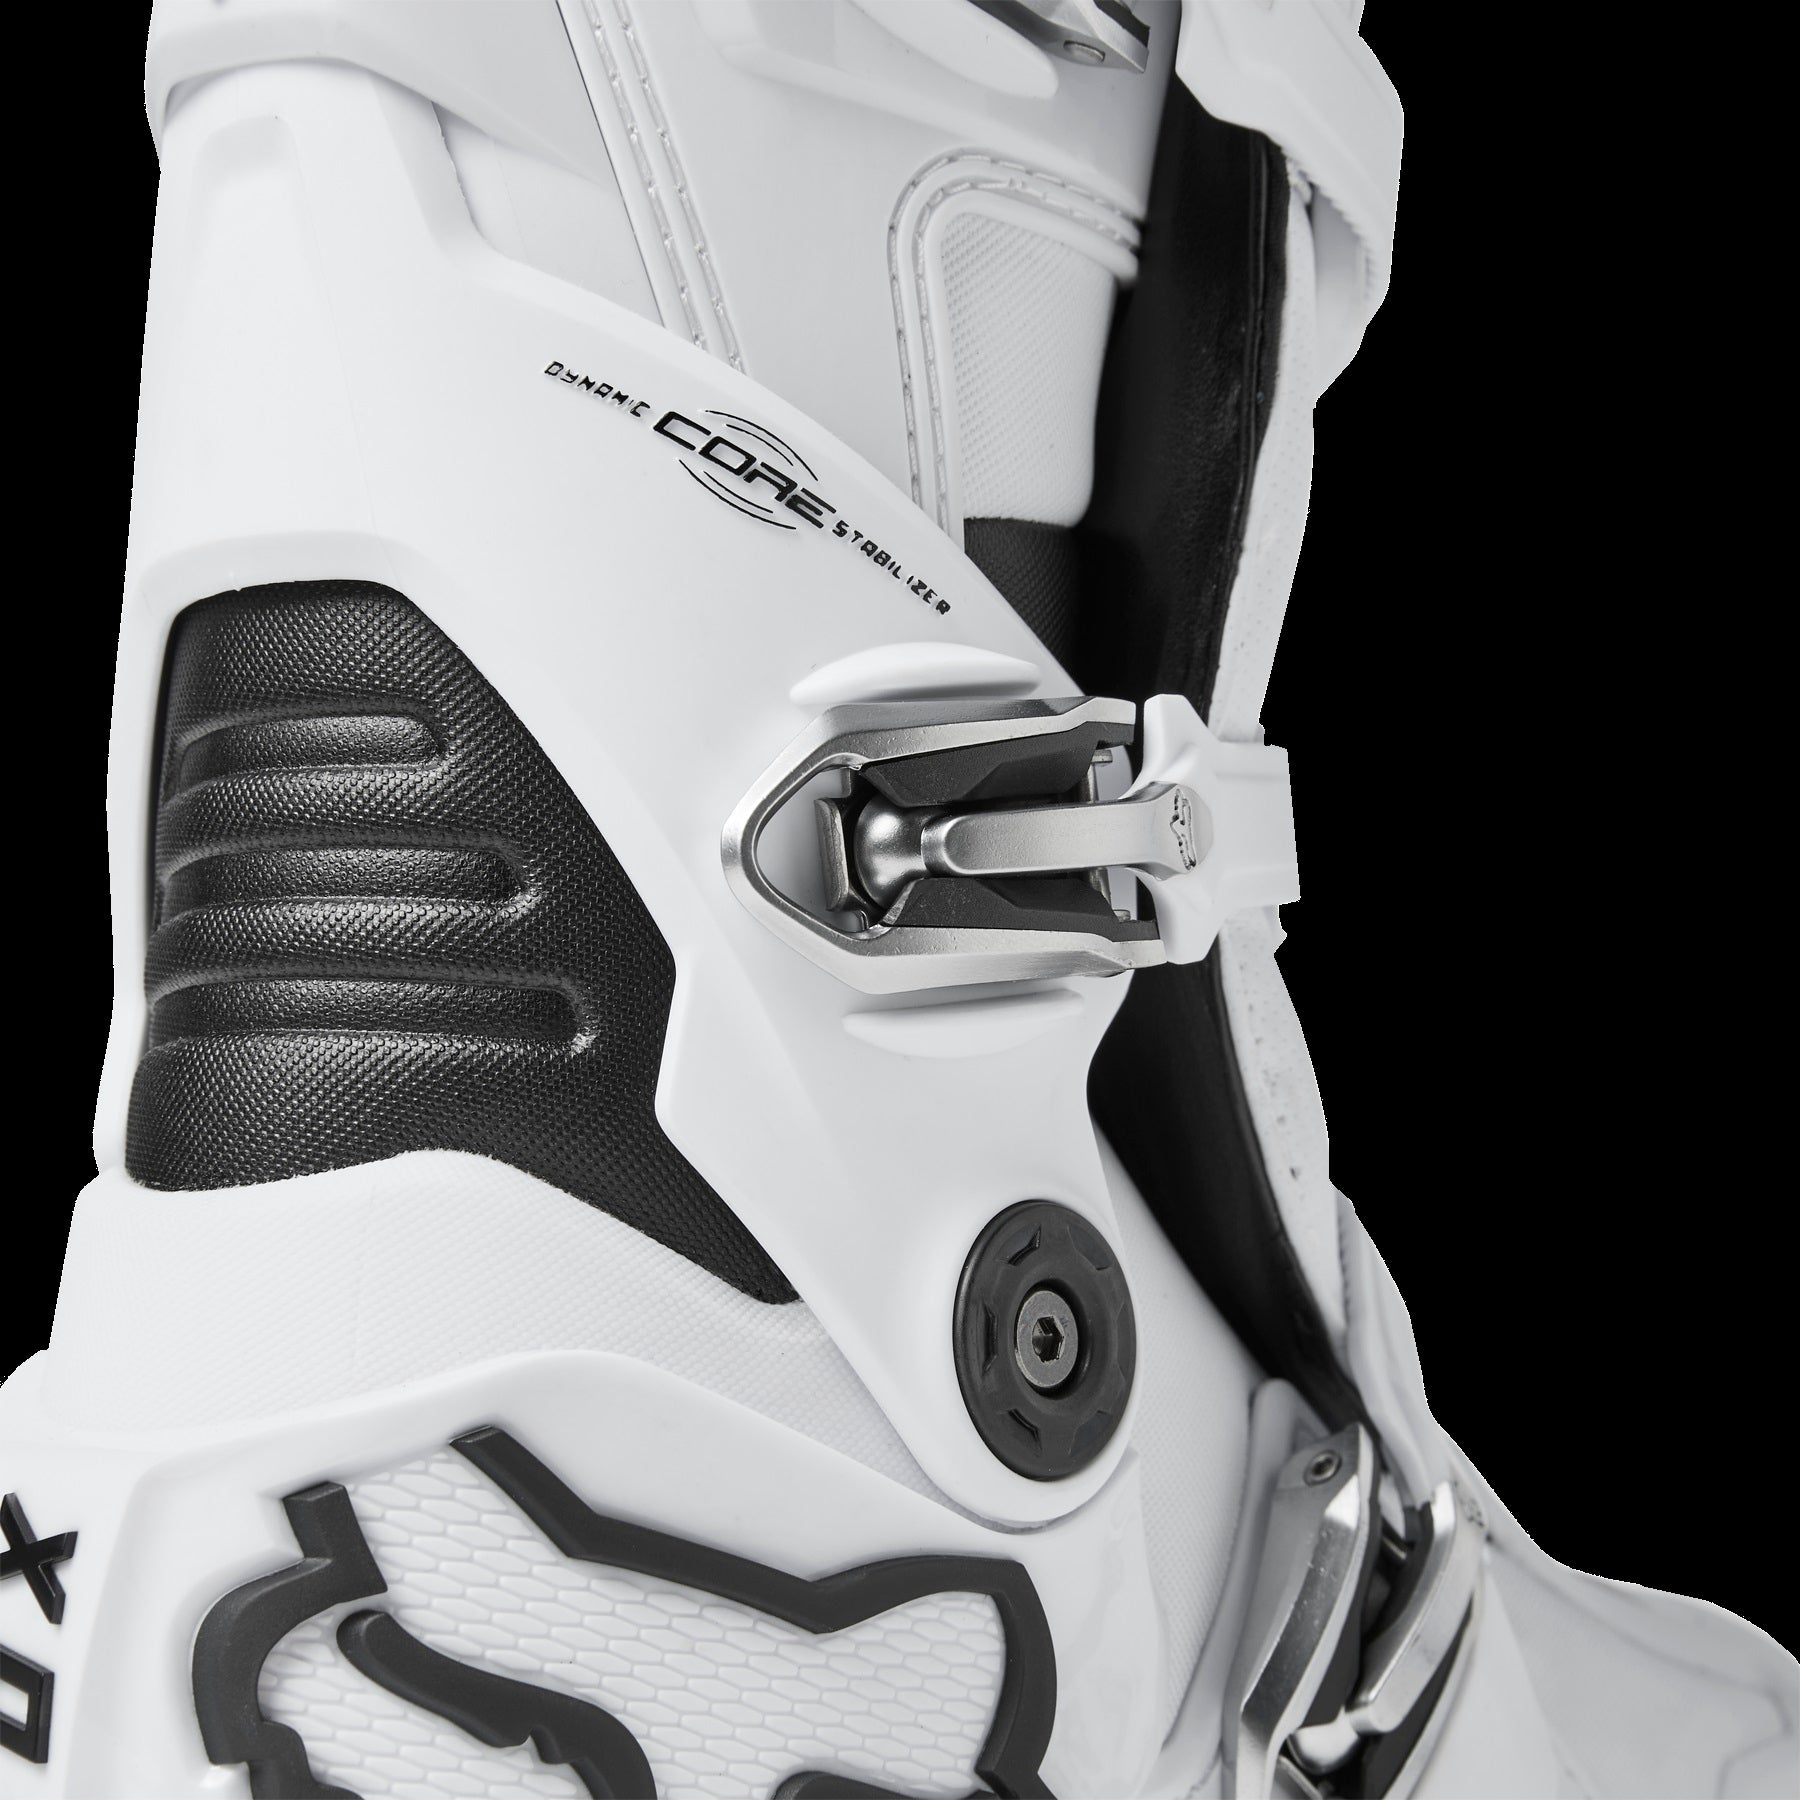 Fox Racing Motion Boots Adult White